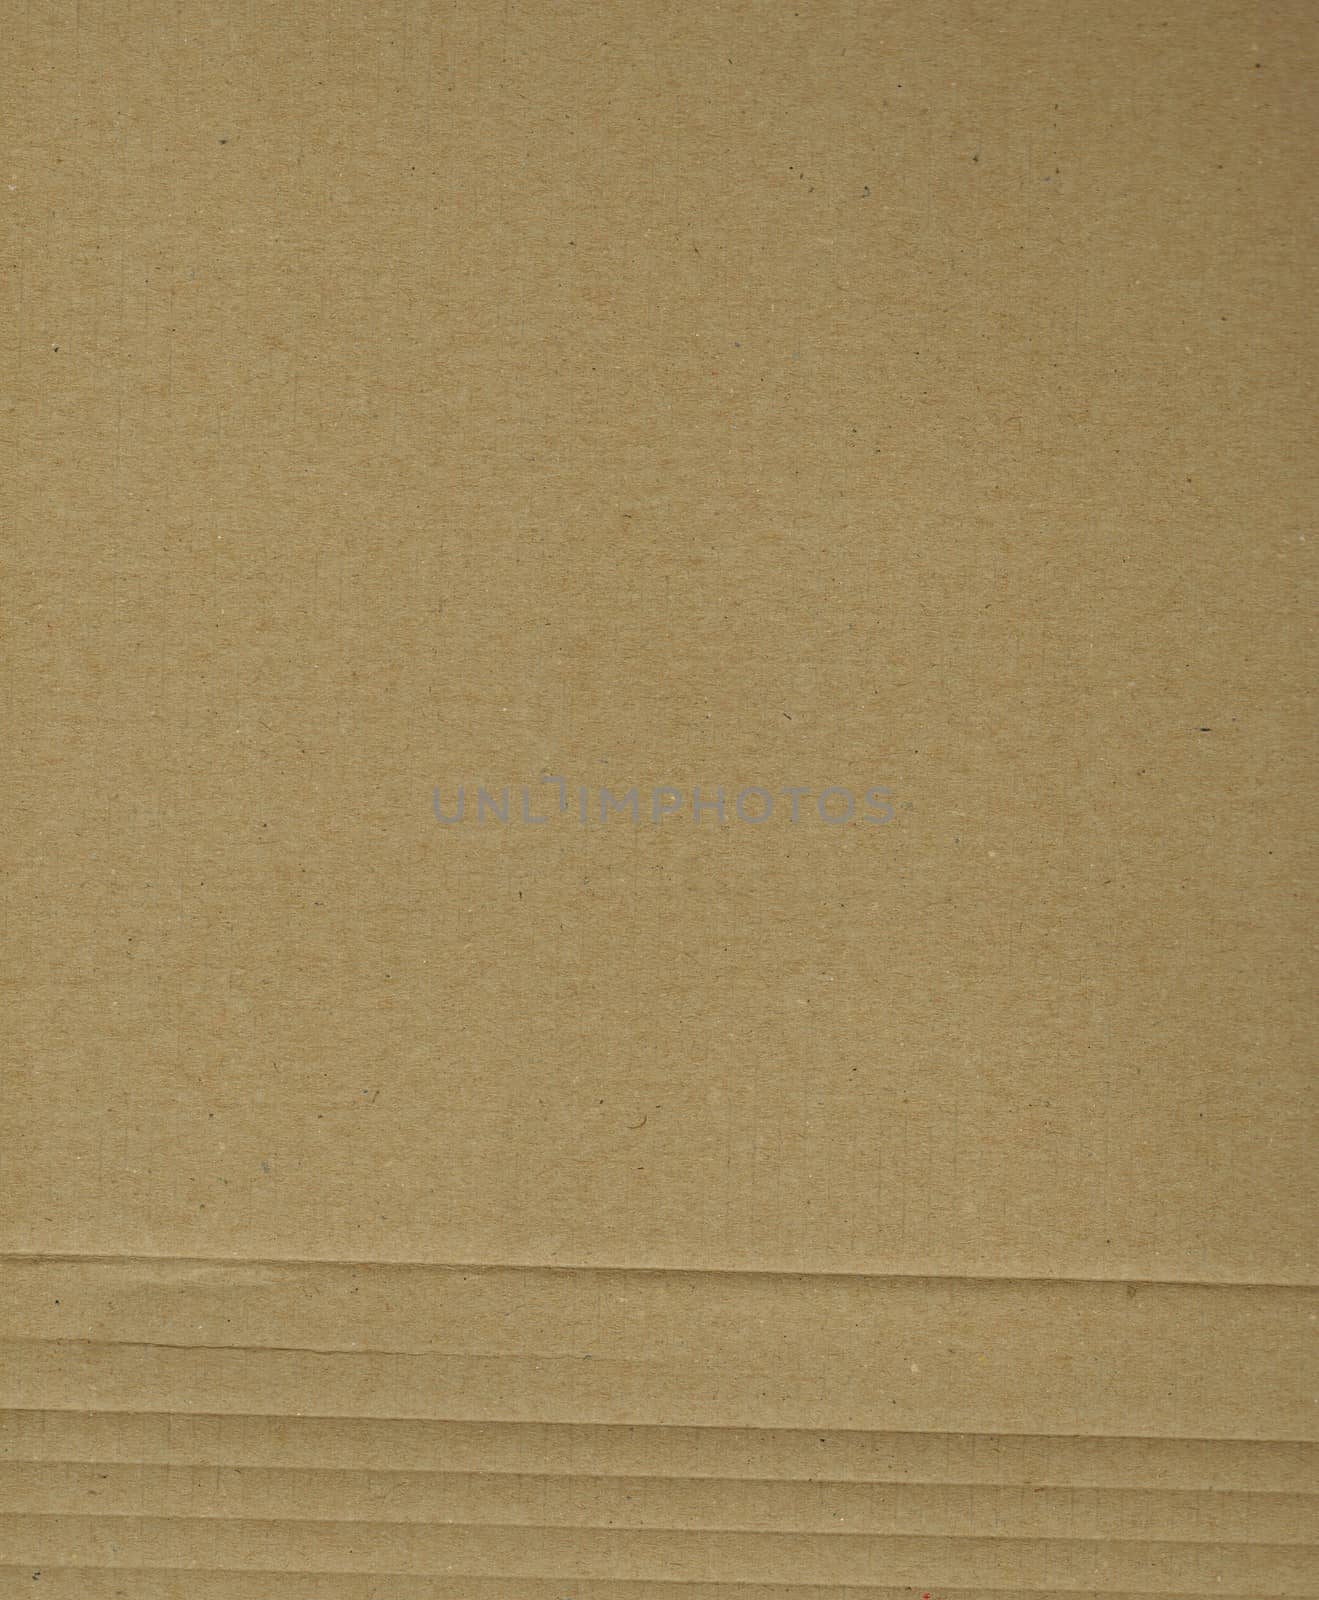 Brown corrugated cardboard sheet useful as a background